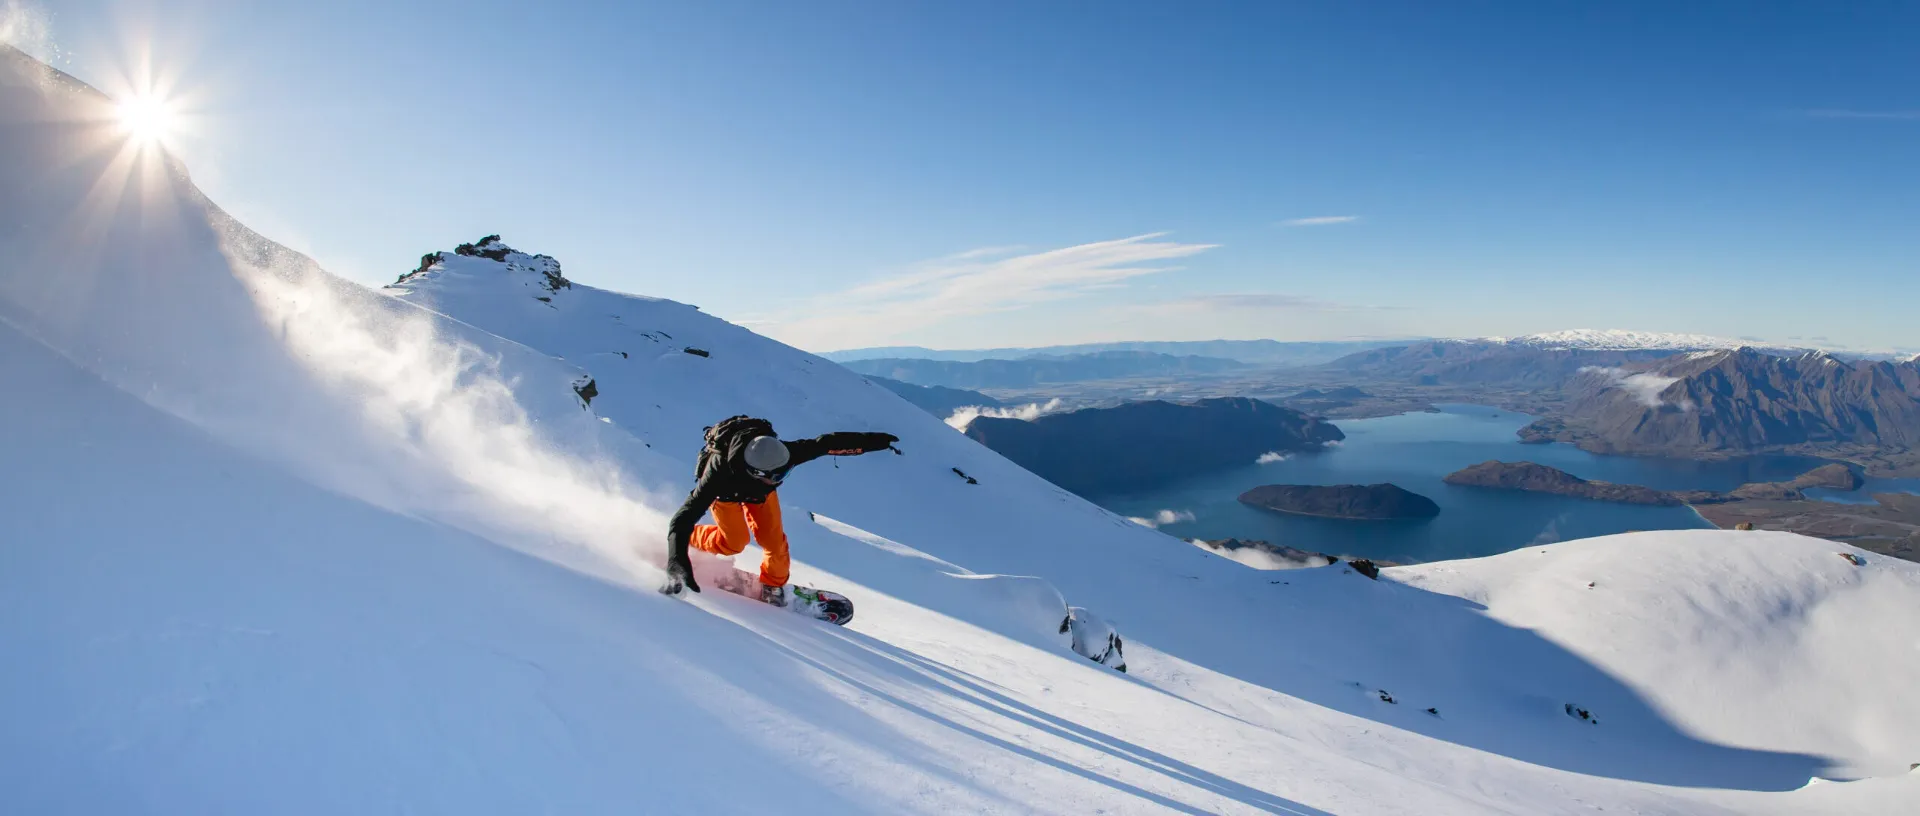 Back country skiing in New Zealand